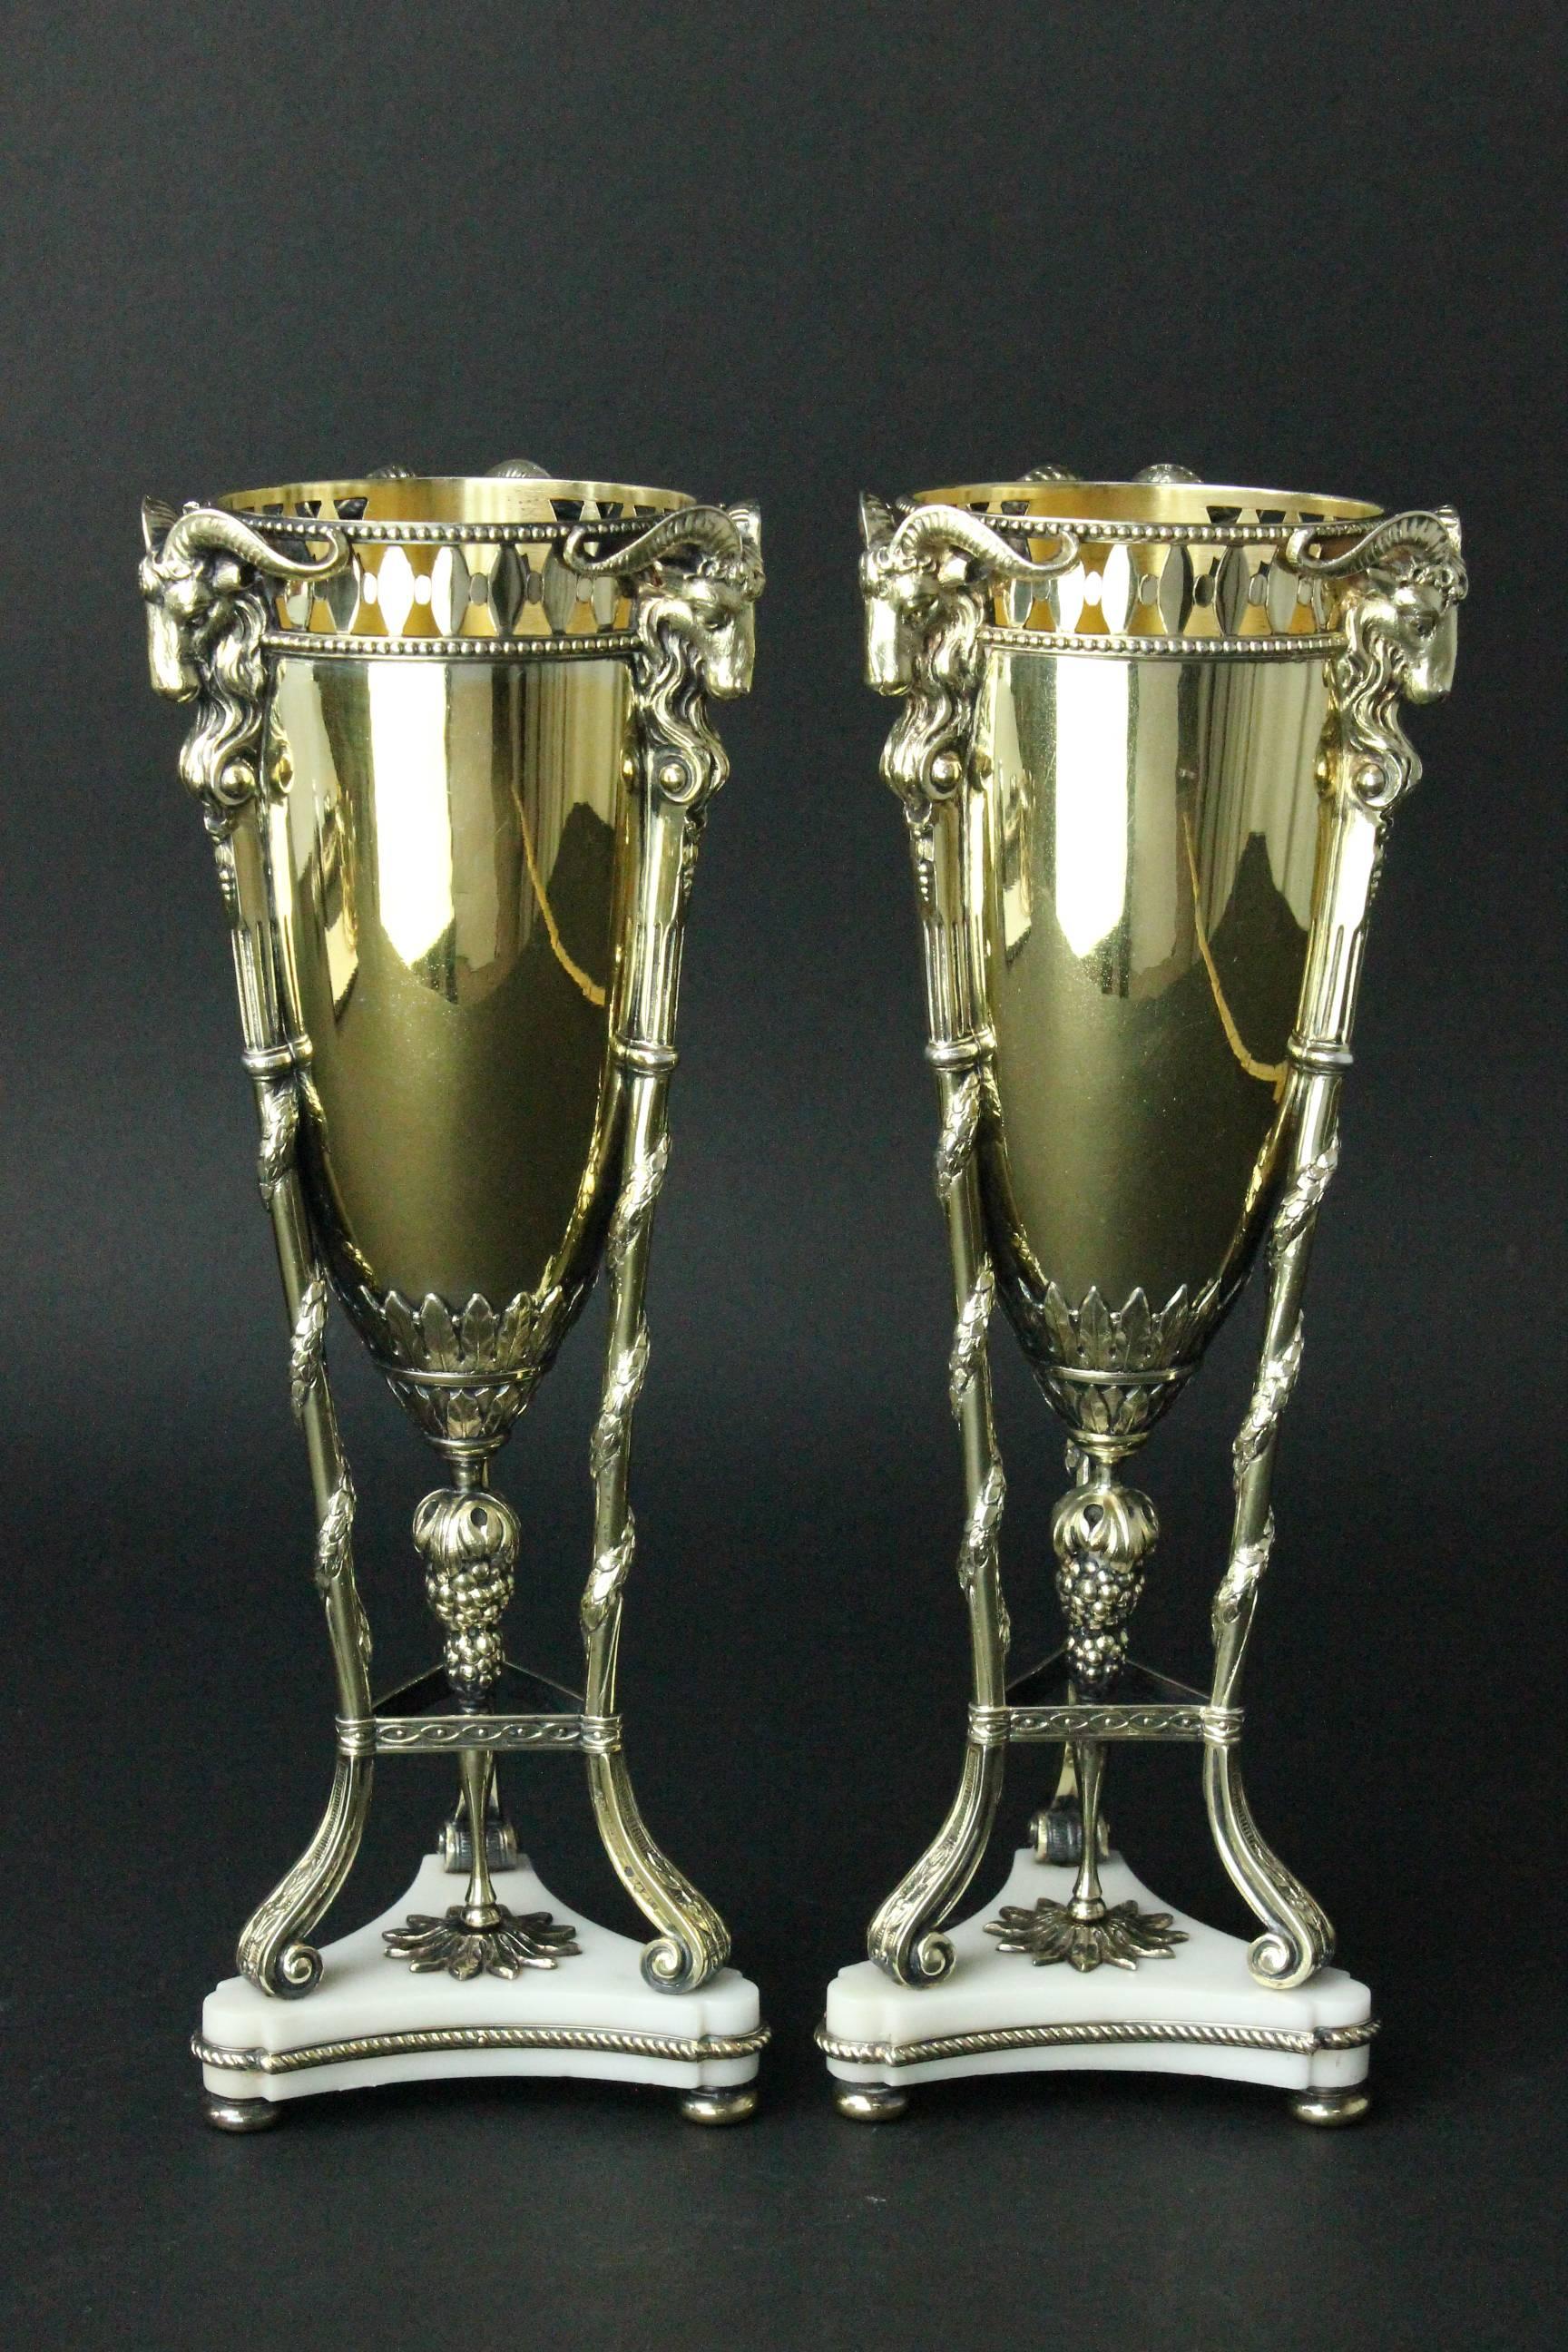 Magnificent Pair of Swedish Gilt Silver and Marble Vases by C G Hallberg, 1912 4